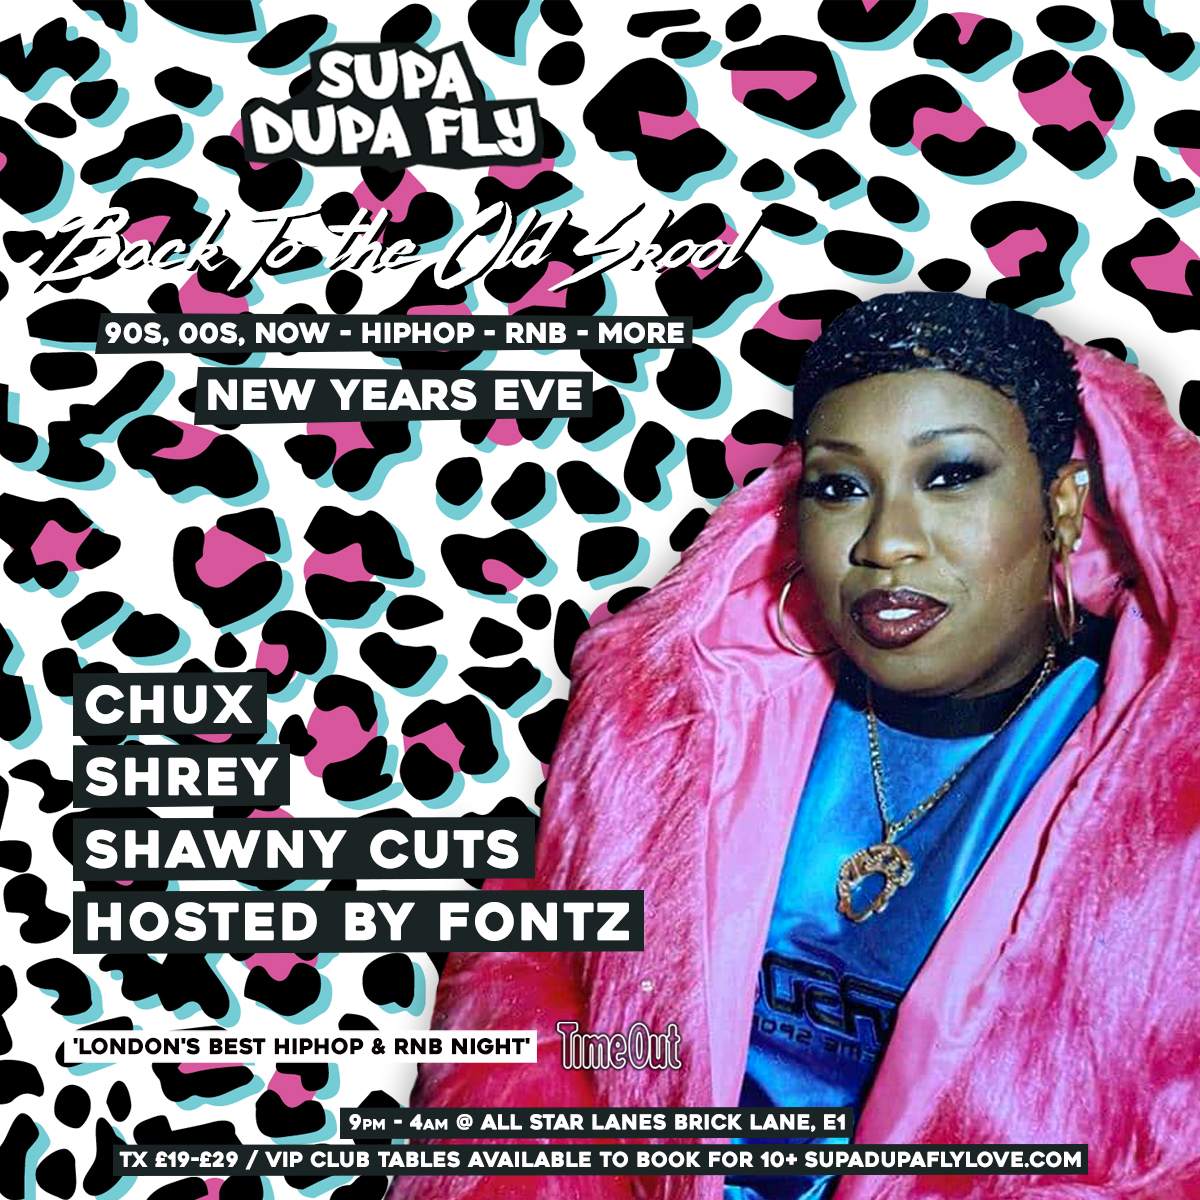 Supa Dupa Fly x Back To The Old Skool New Years Eve - Página trasera